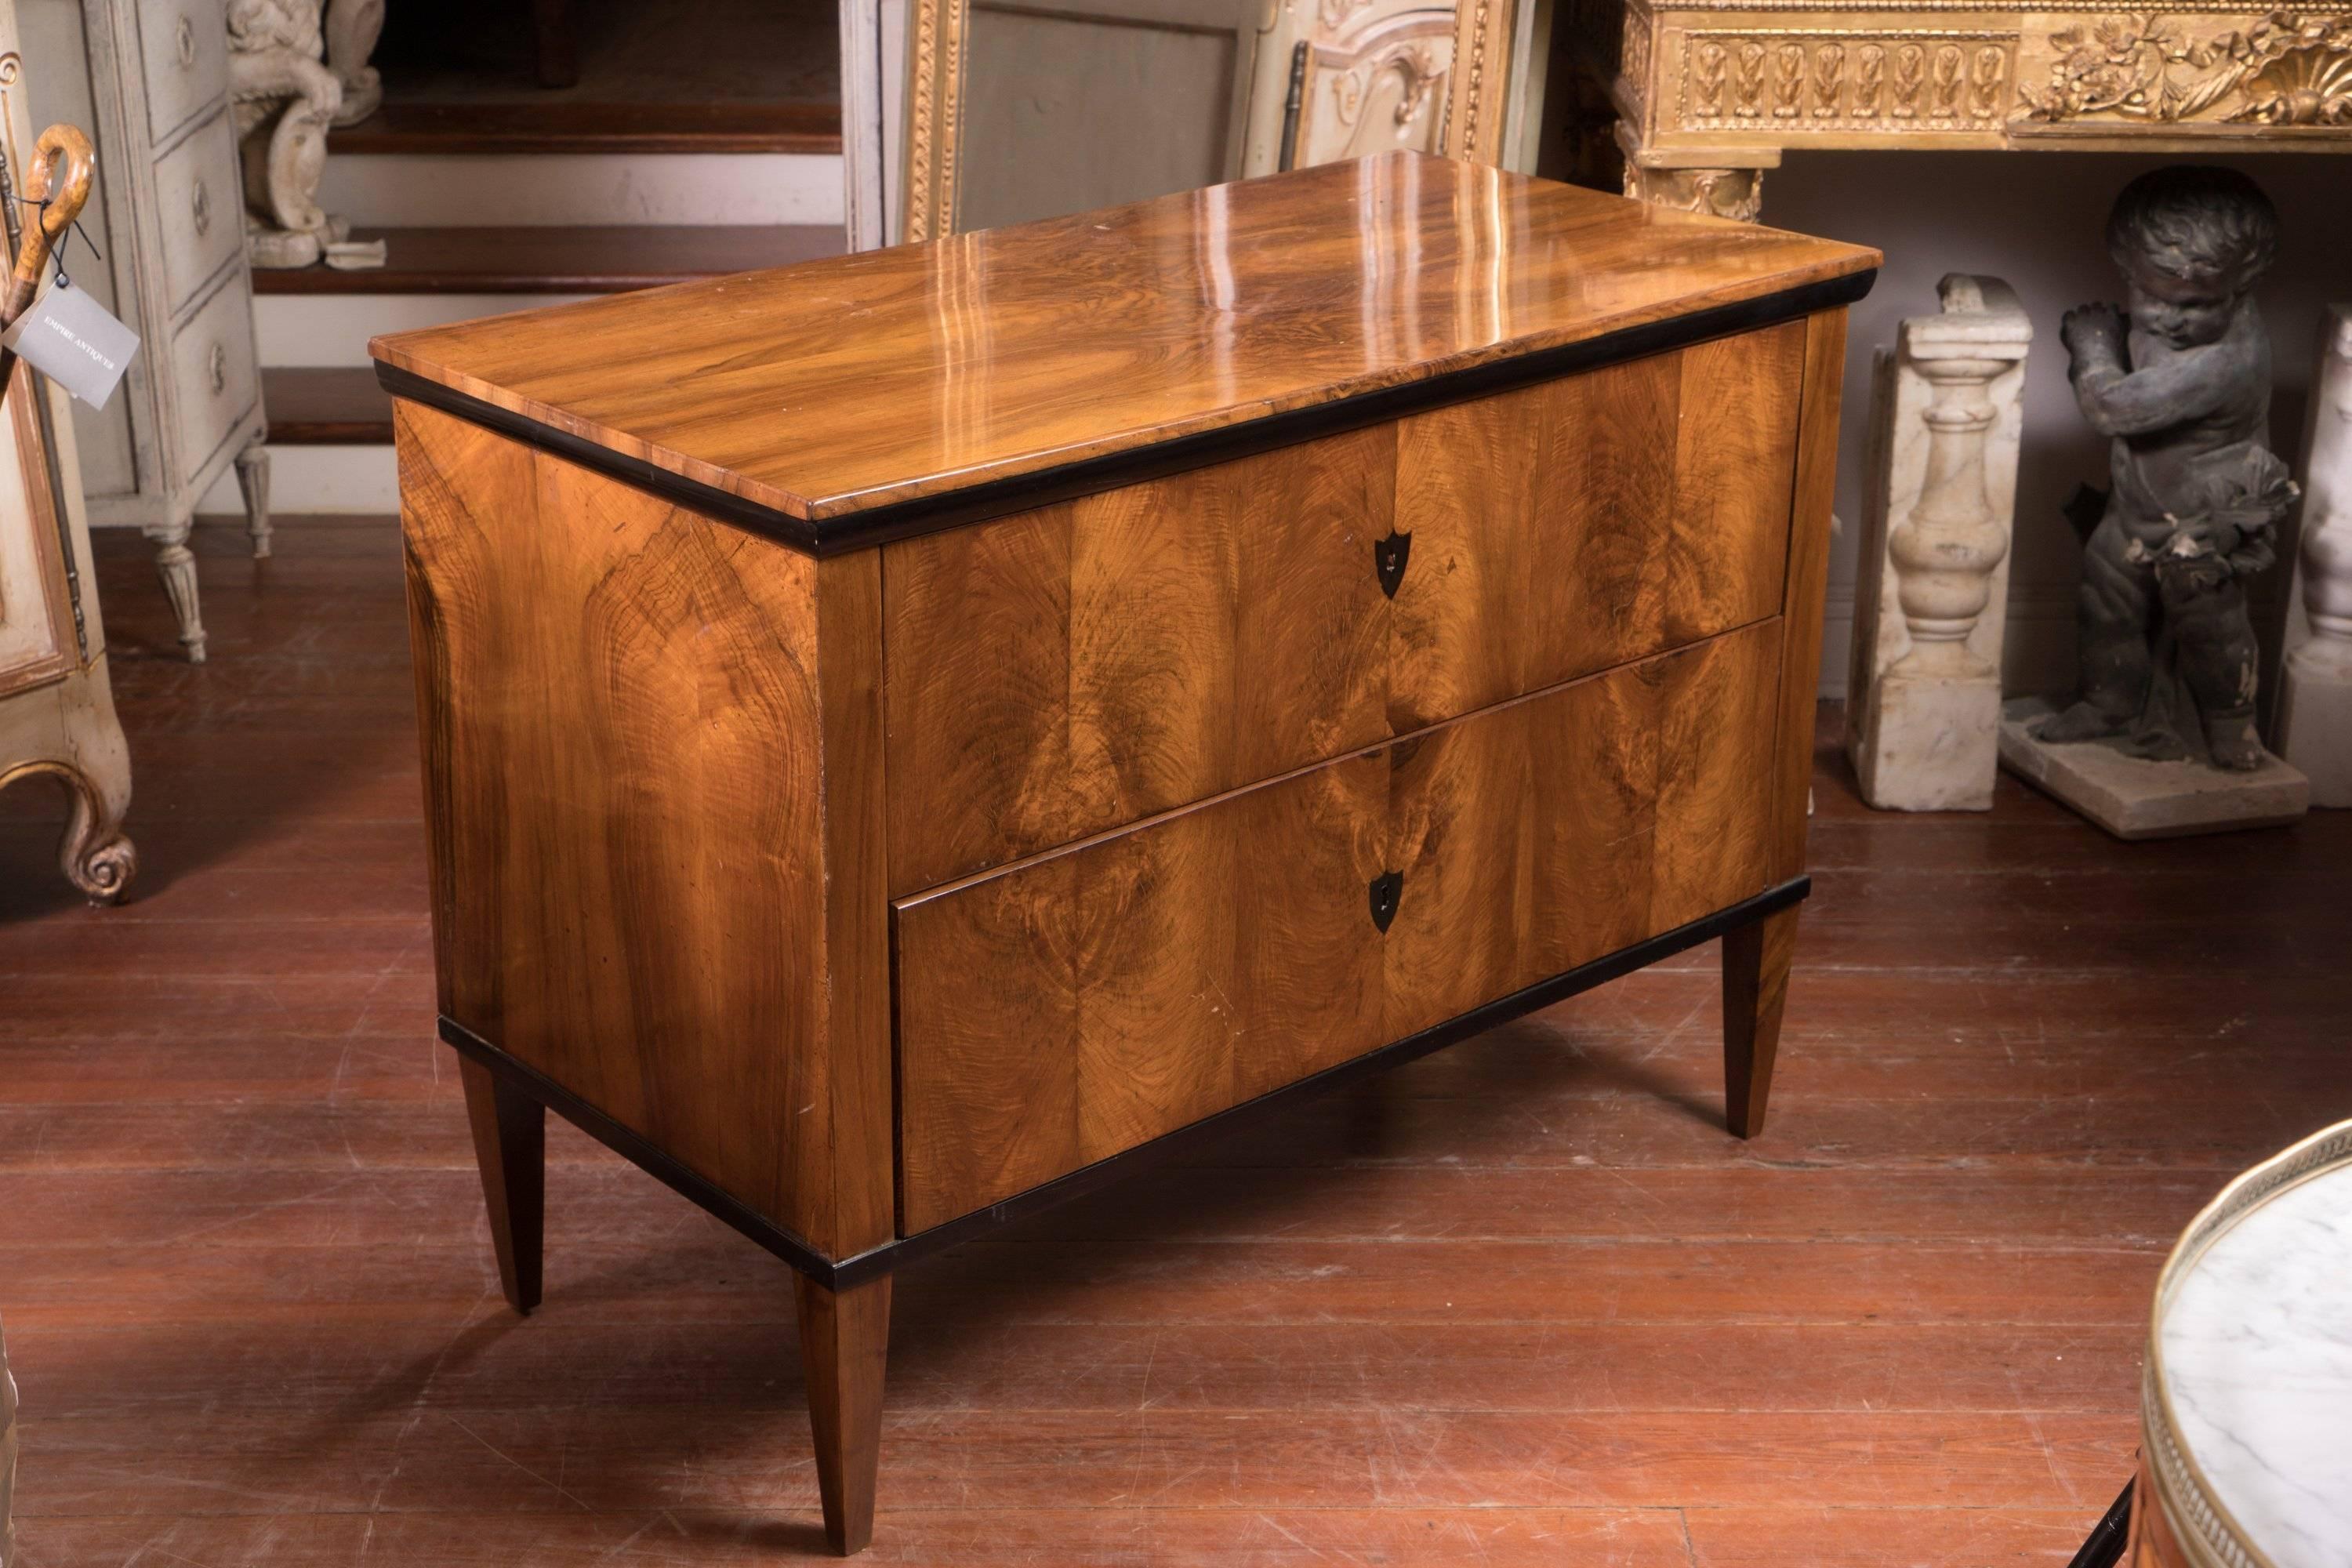 Stunning honey colored maple and ebony commode. Early 19th century Northern European simple and chic two-drawer commode.